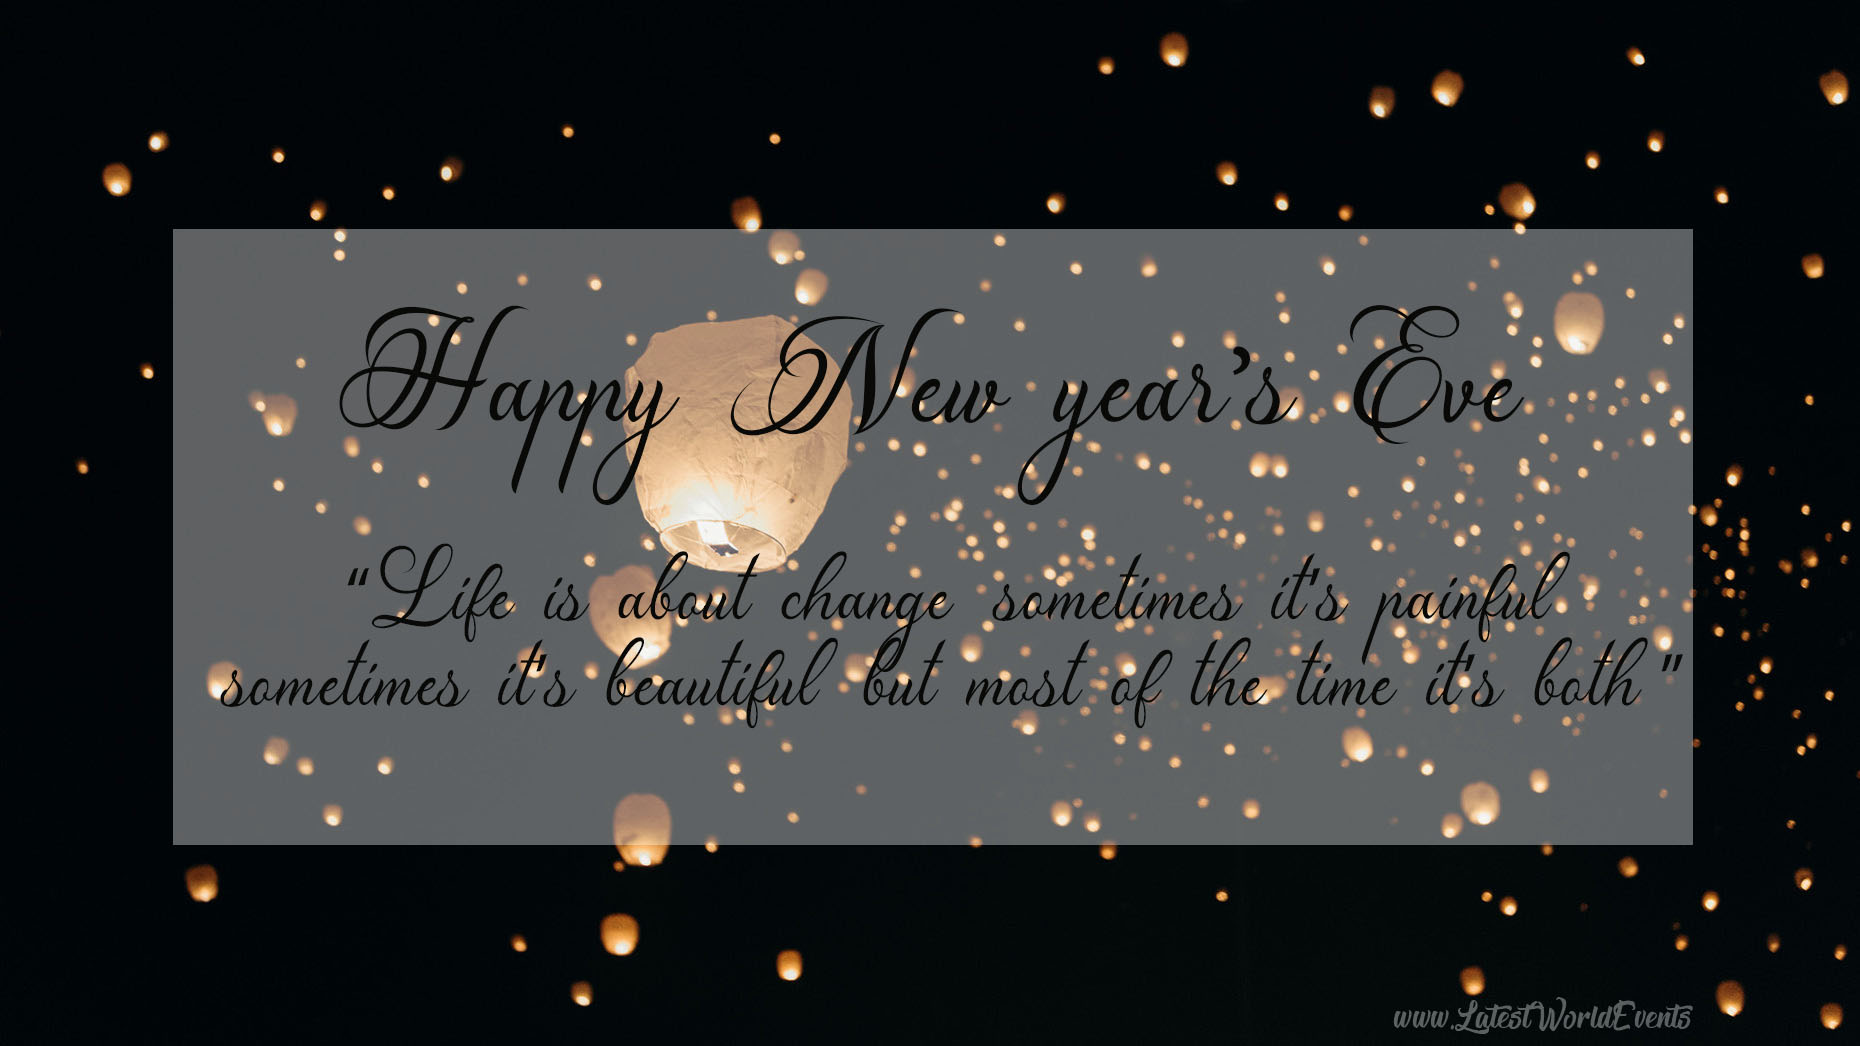 Download-happy-new-year's-eve-wishes